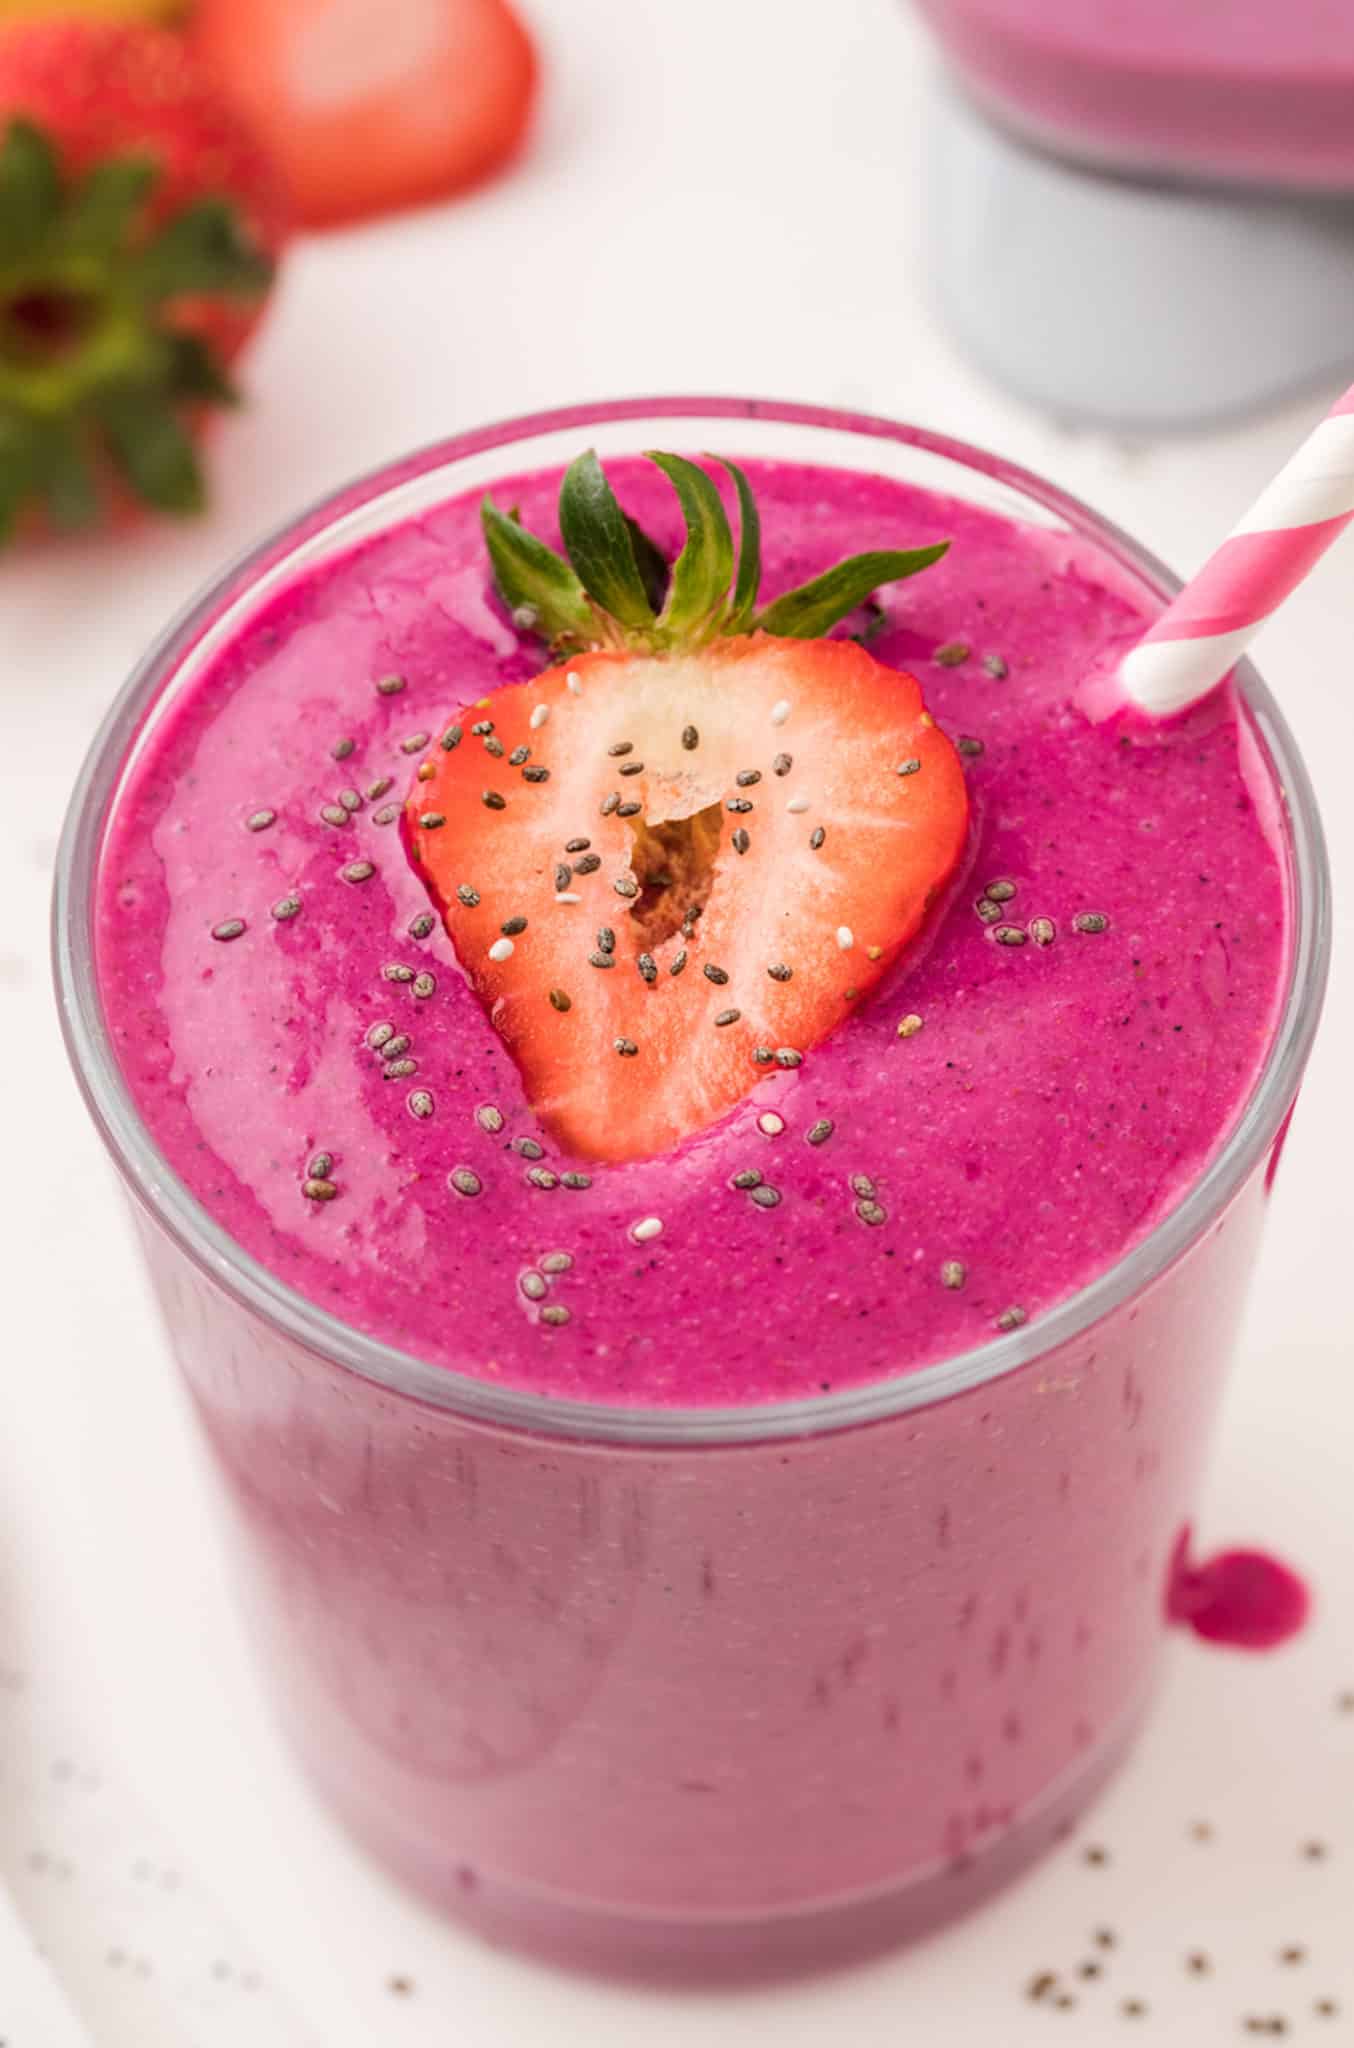 purple dragon fruit banana smoothie served in a glass